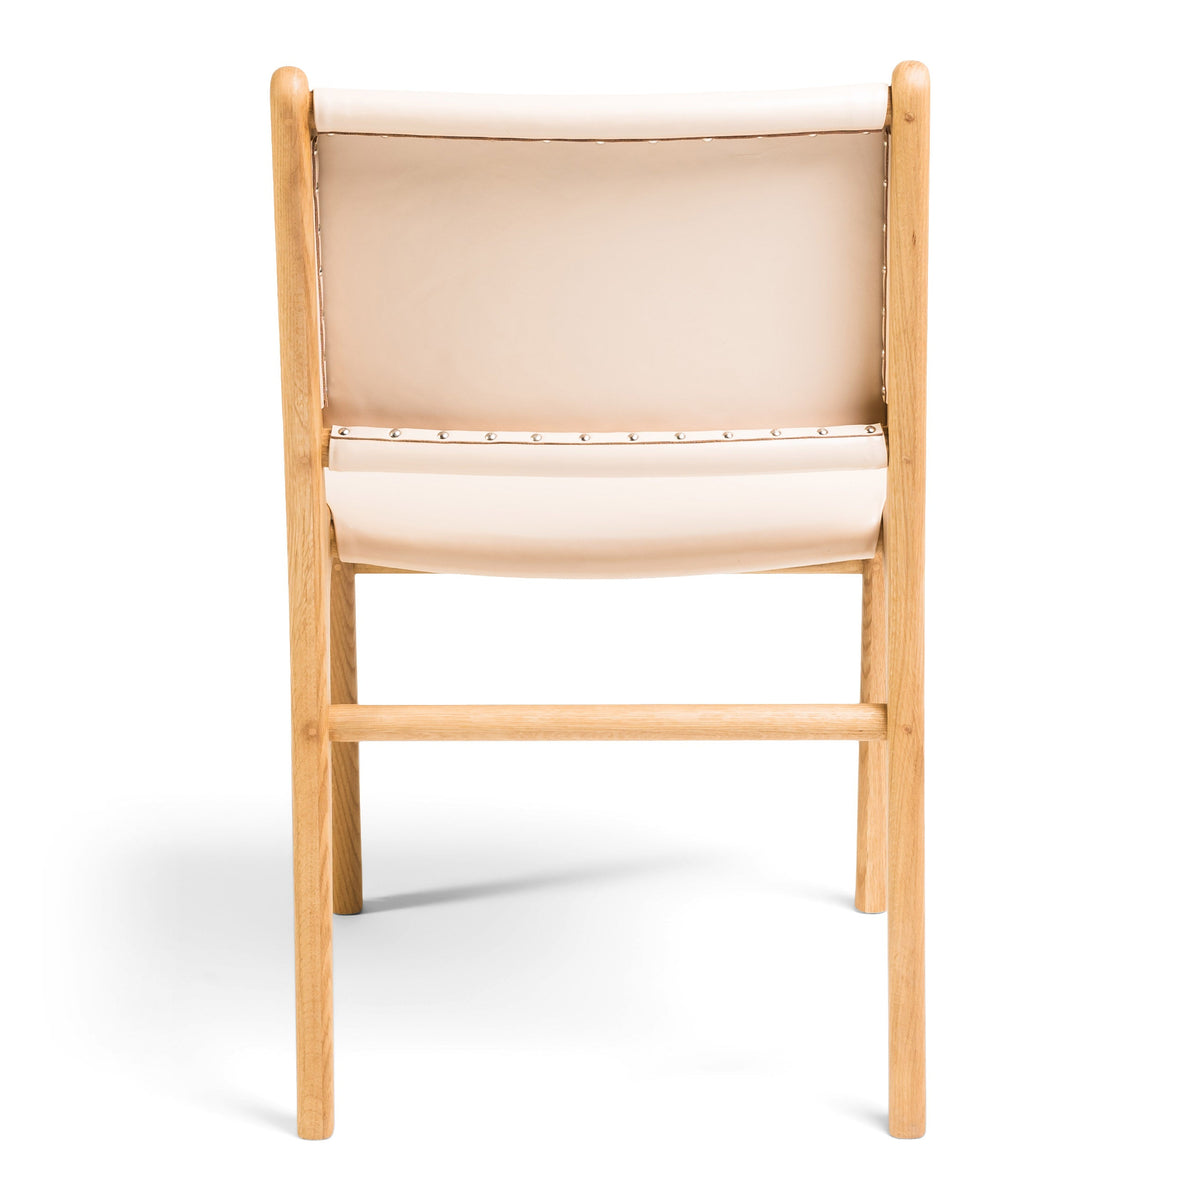 Clearance - Spensley Dining Chair - Rose Blush